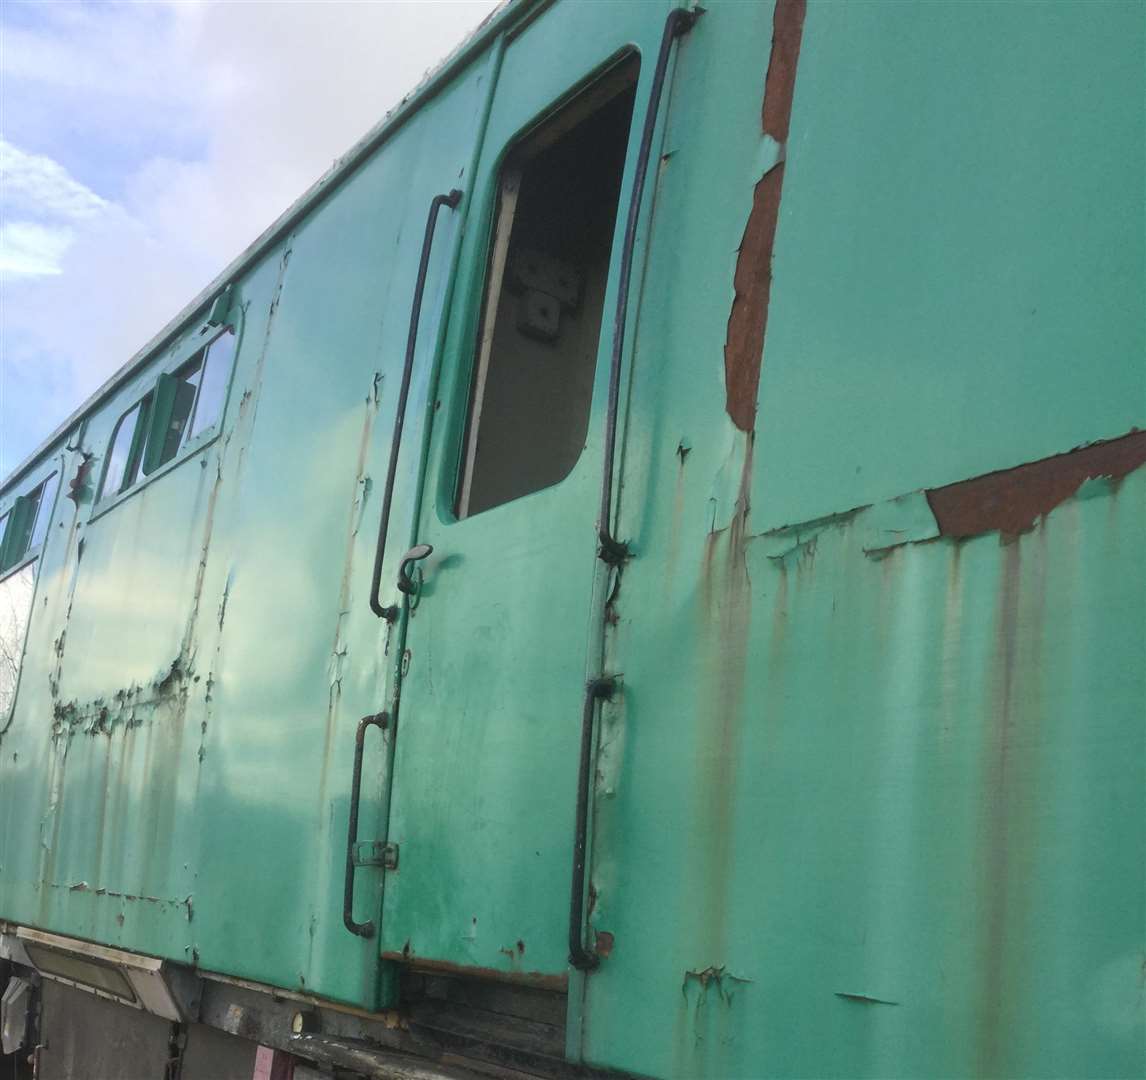 The mess coach where windows were smashed and lockers forced open